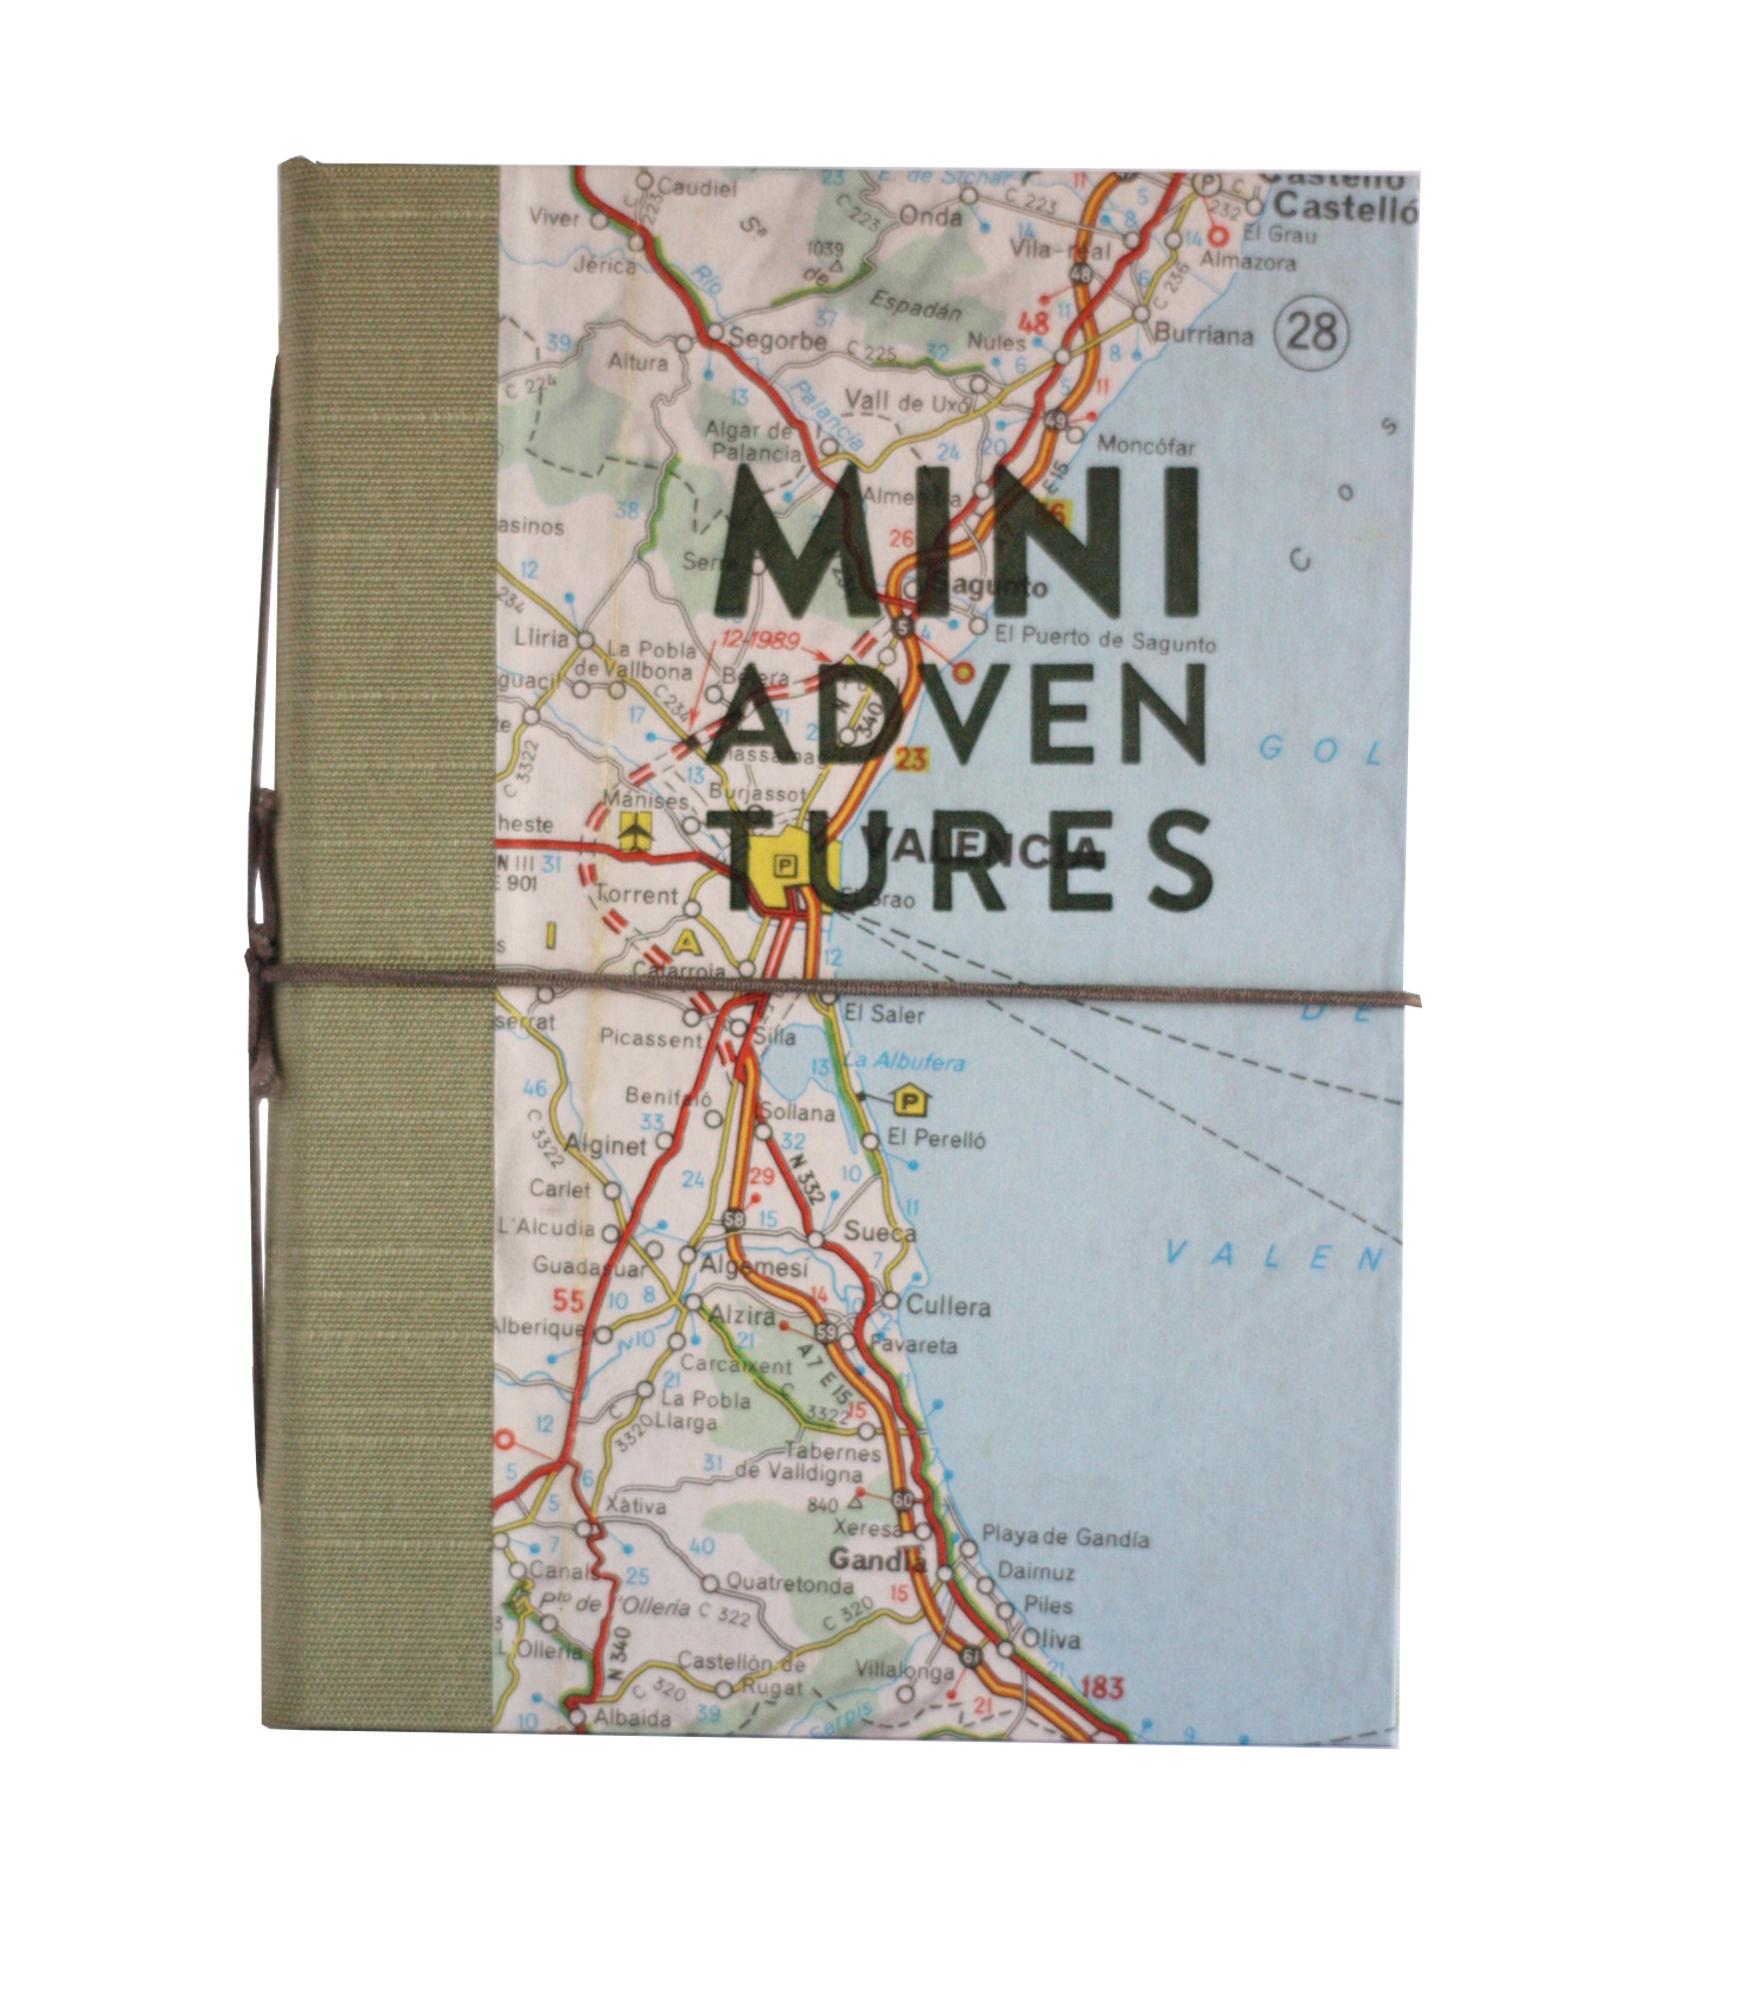 Mini Adventure Journal with Letterpress Cover